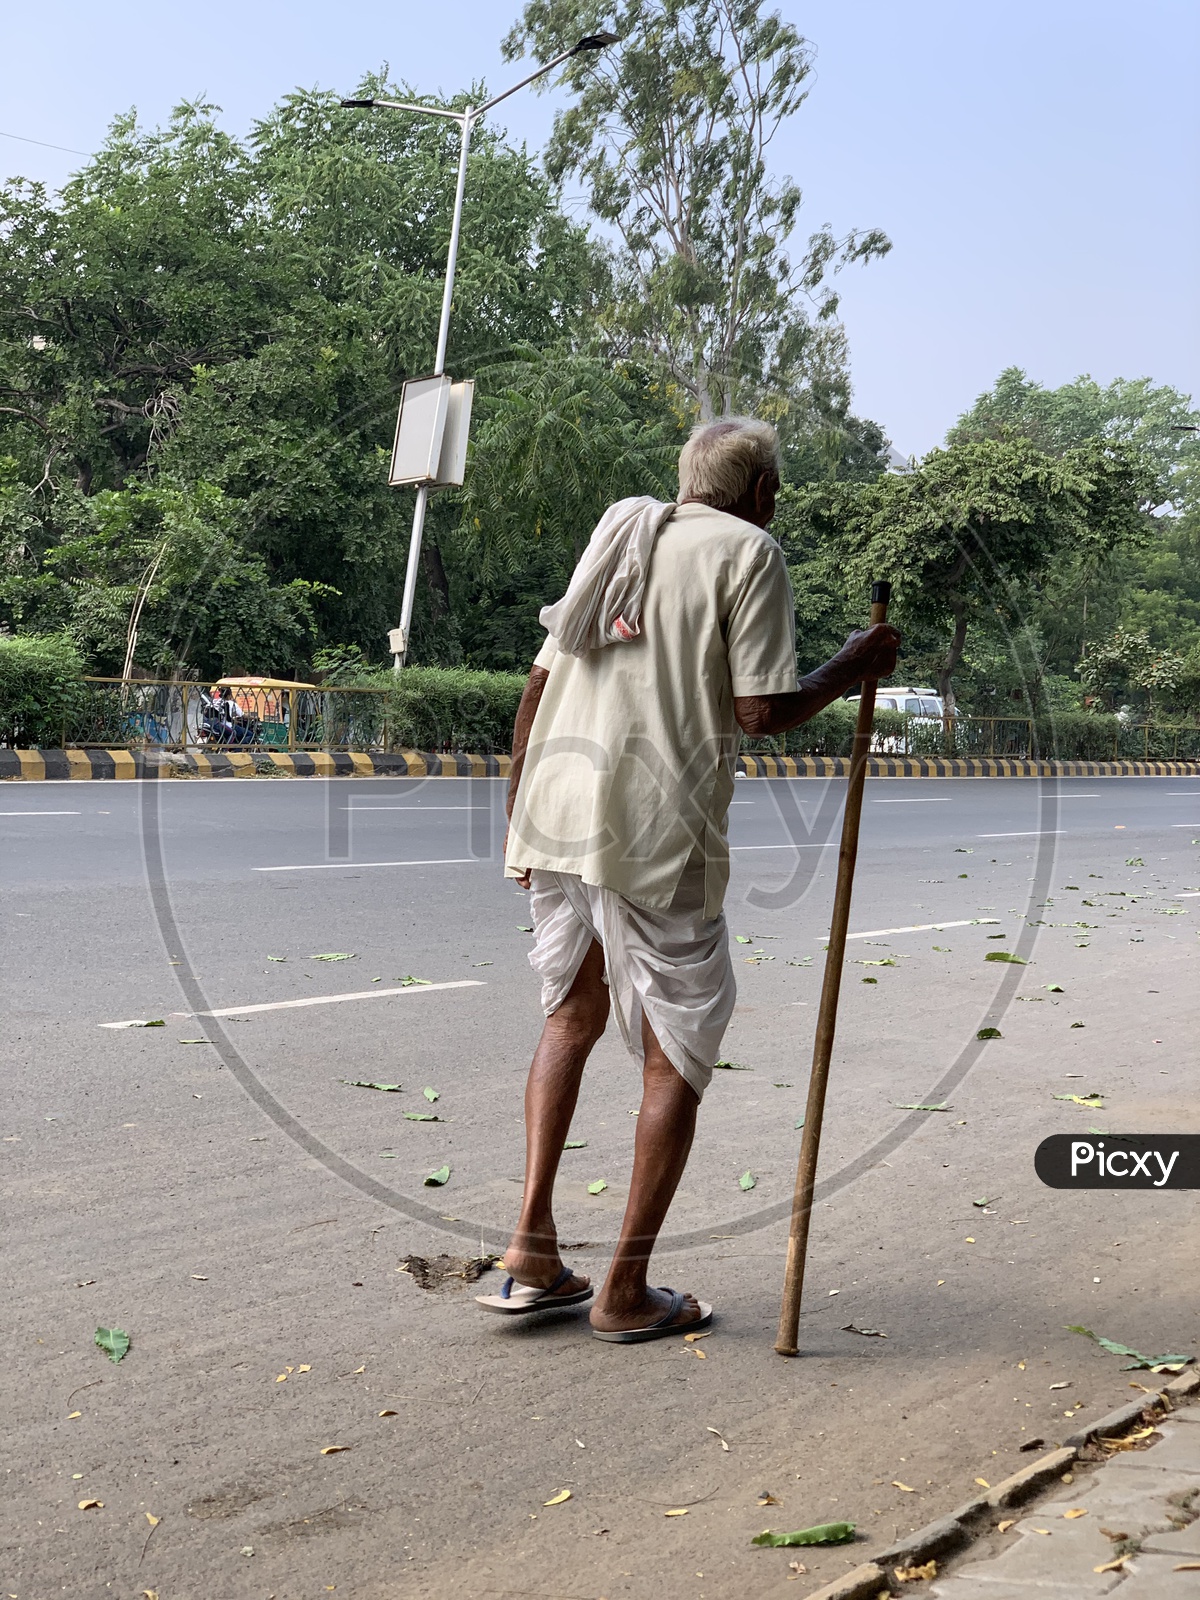 An Indian Old Man Walking on Roads With Help Of an Stick